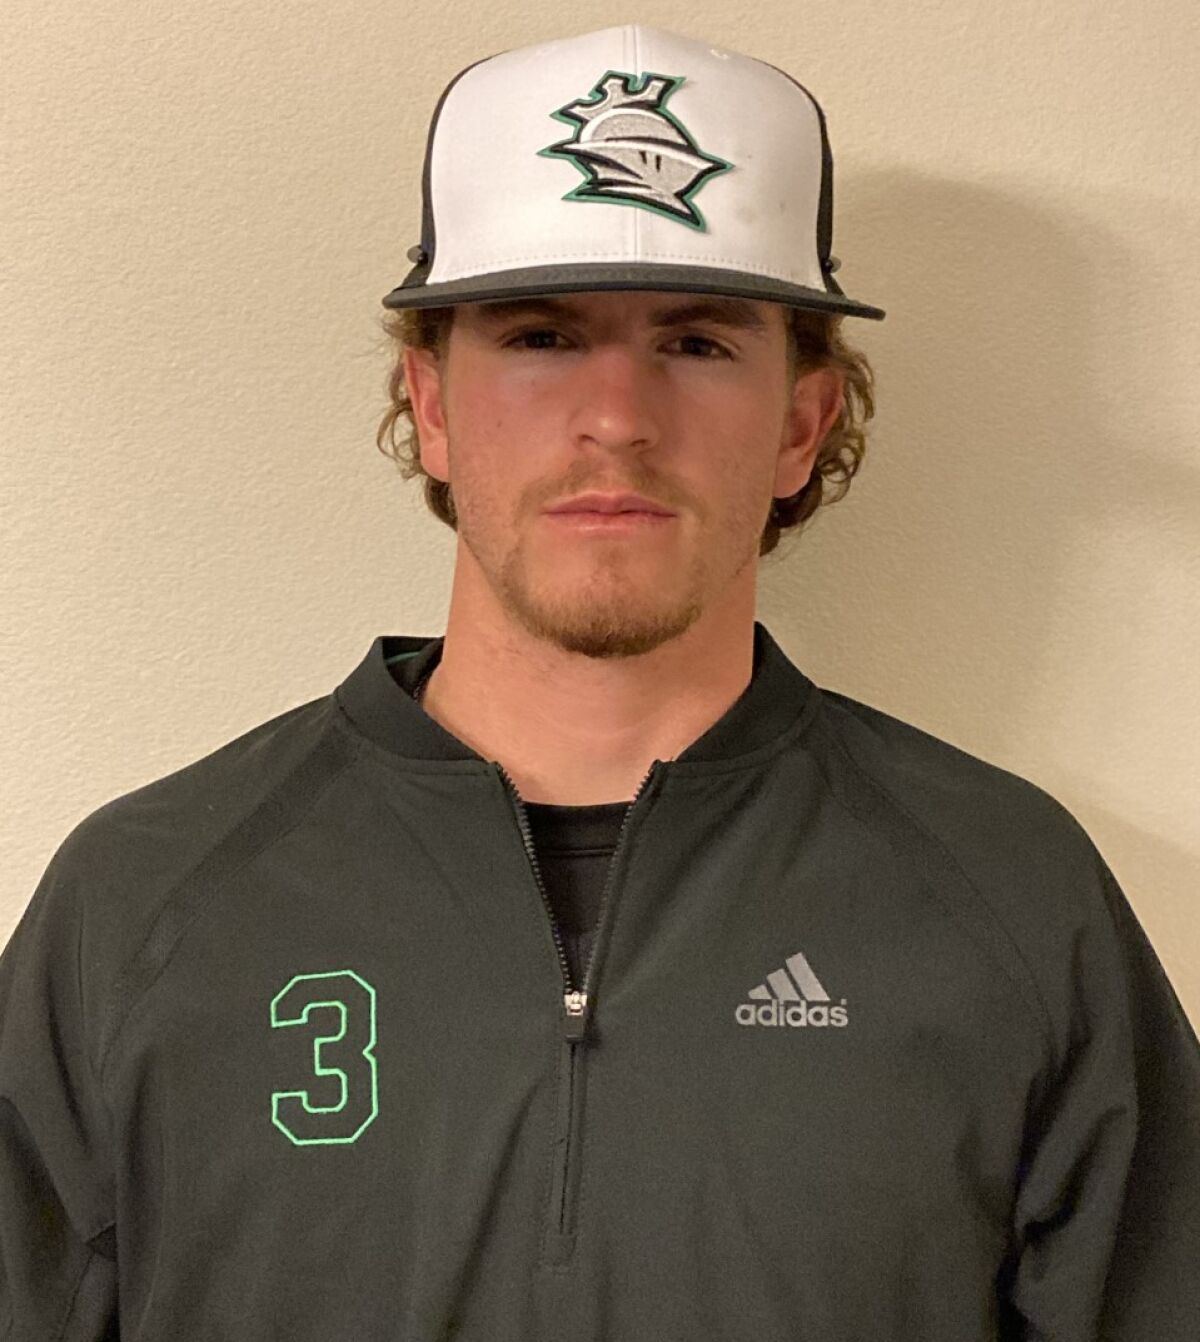 Senior Roc Riggio of Thousand Oaks has hit a home run in each of his team's first five games.